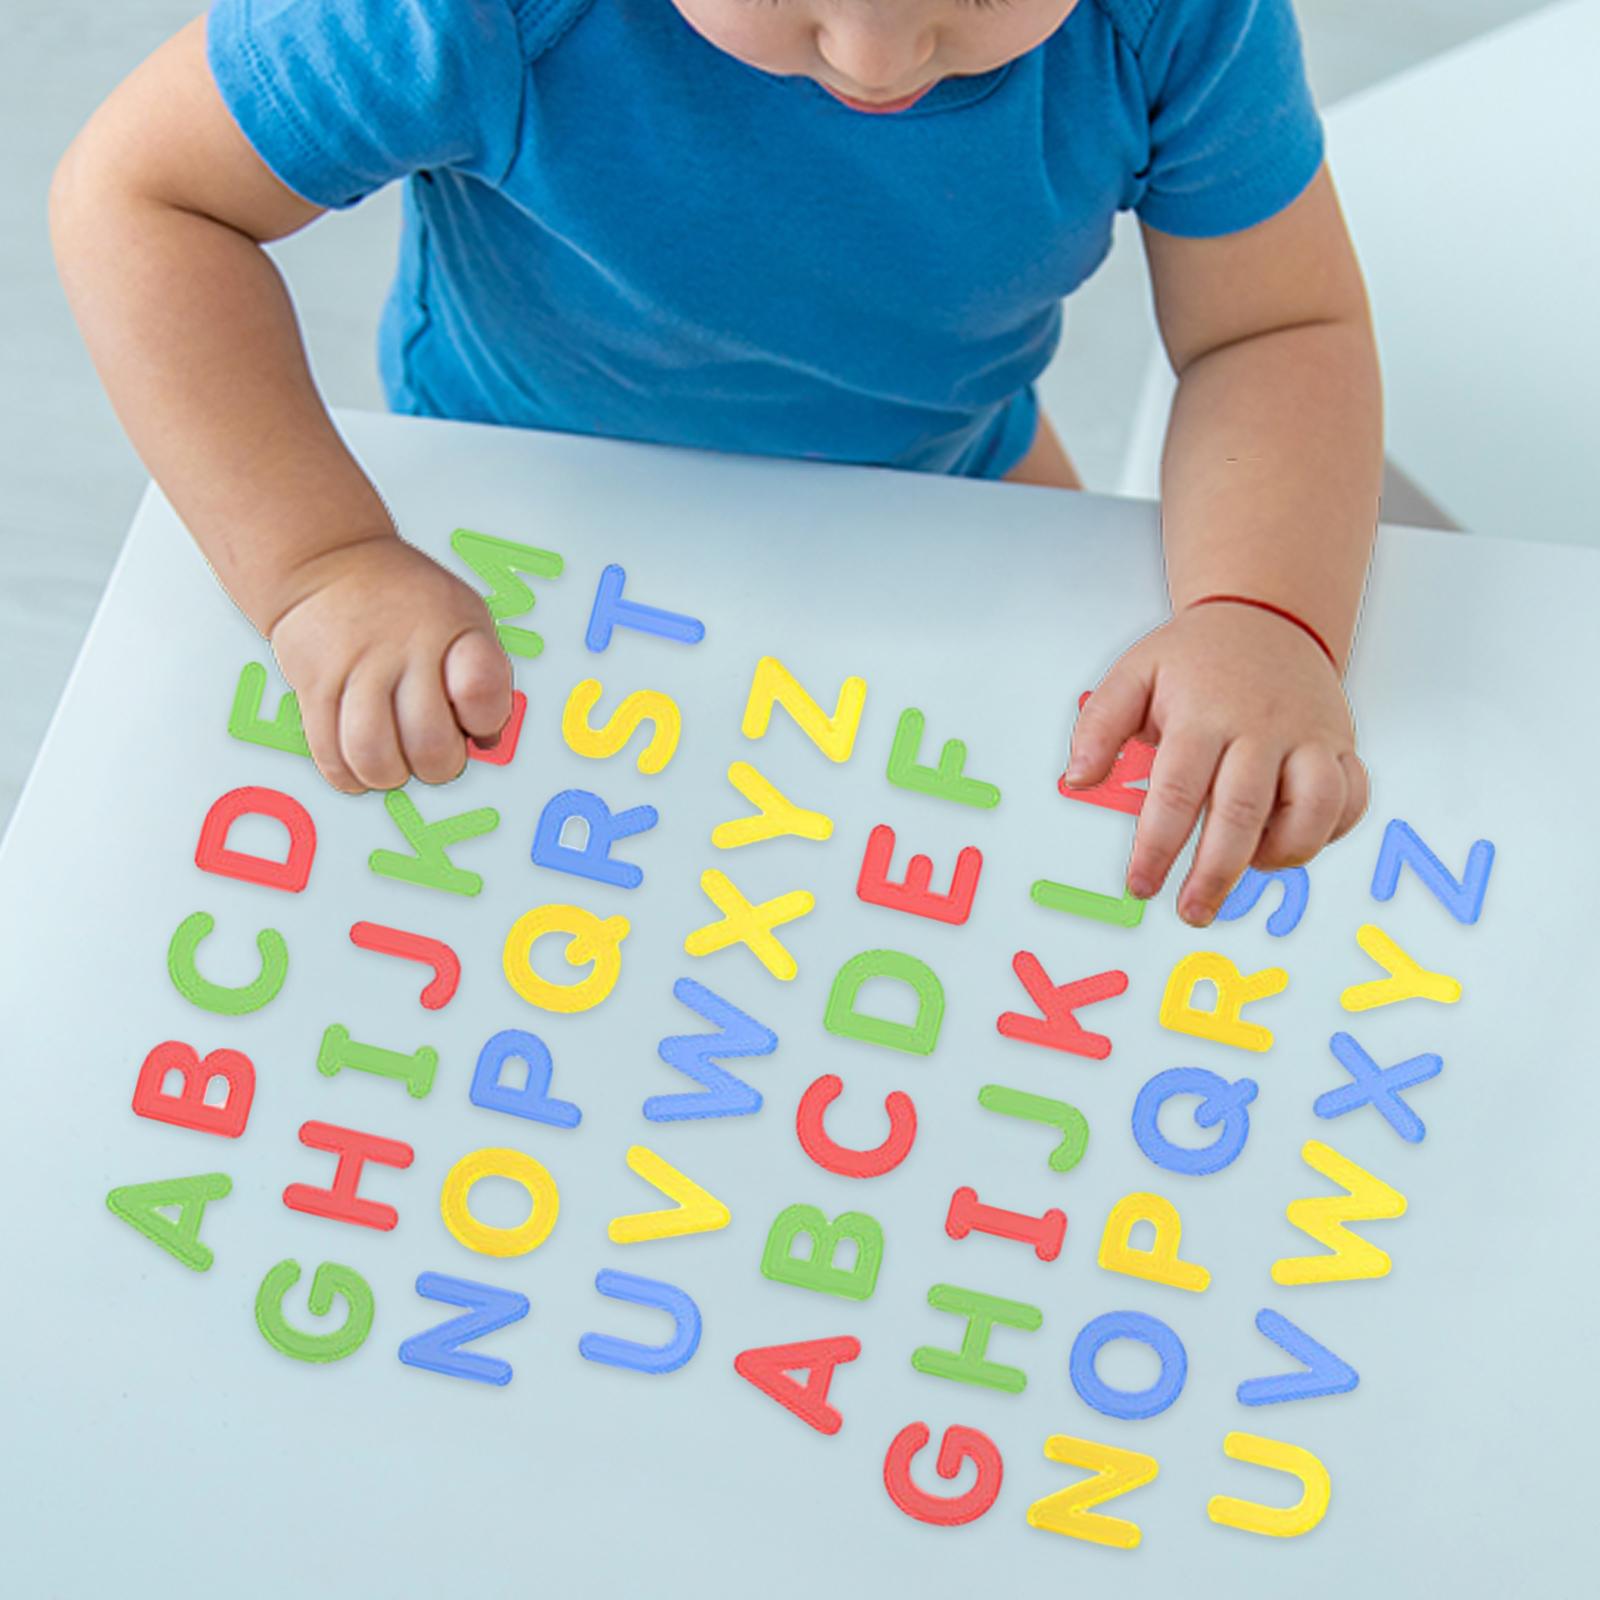 Magideal transparent letters and numbers learning vocabulary pattern - ảnh sản phẩm 3